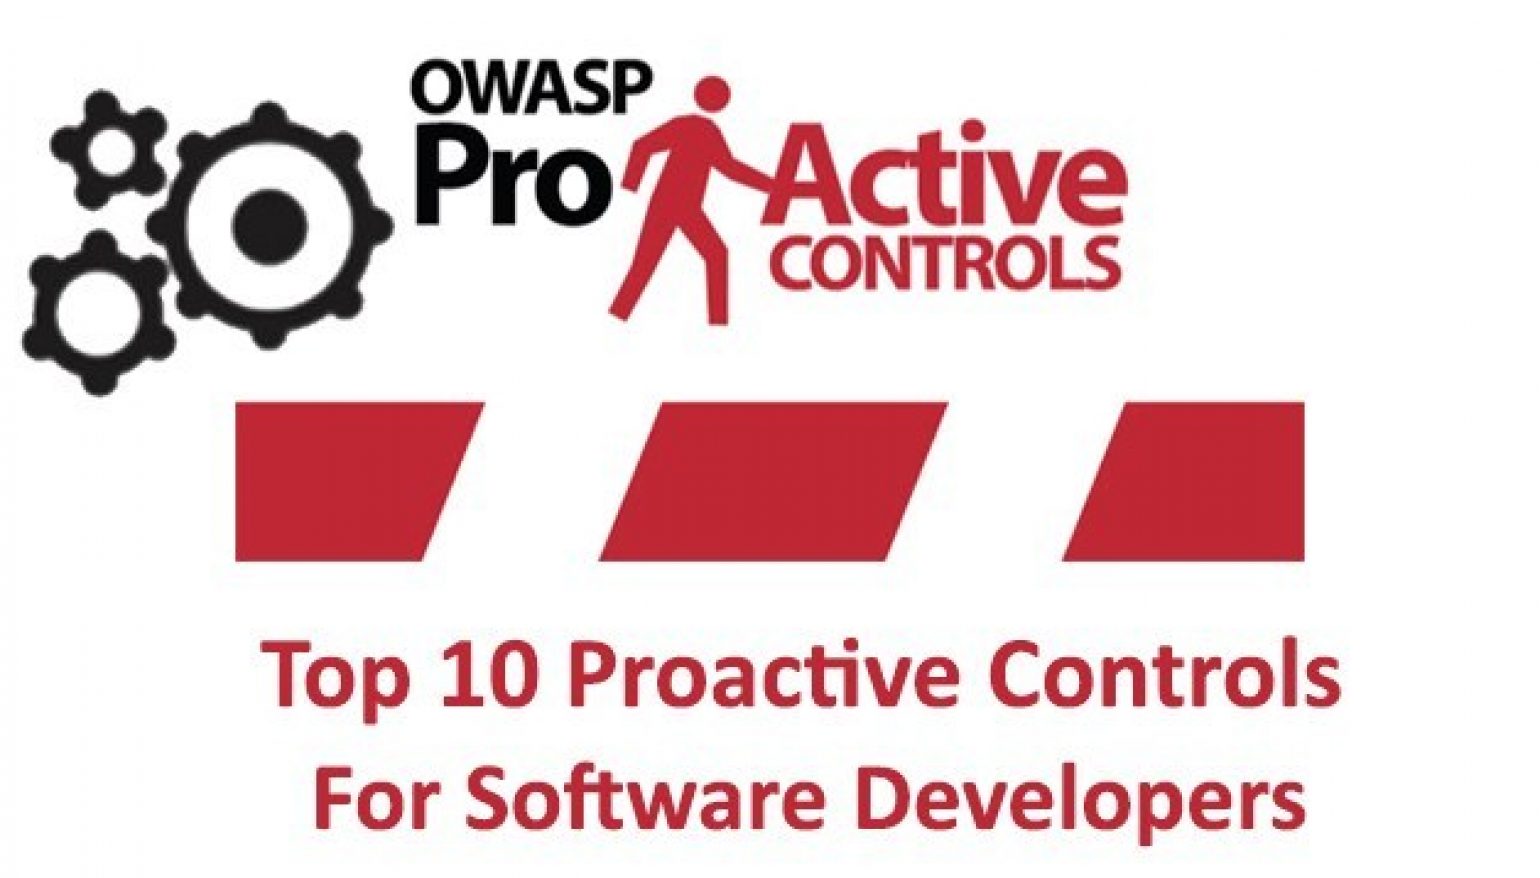 OWASP Top 10 Proactive Security Controls For Software Developers to